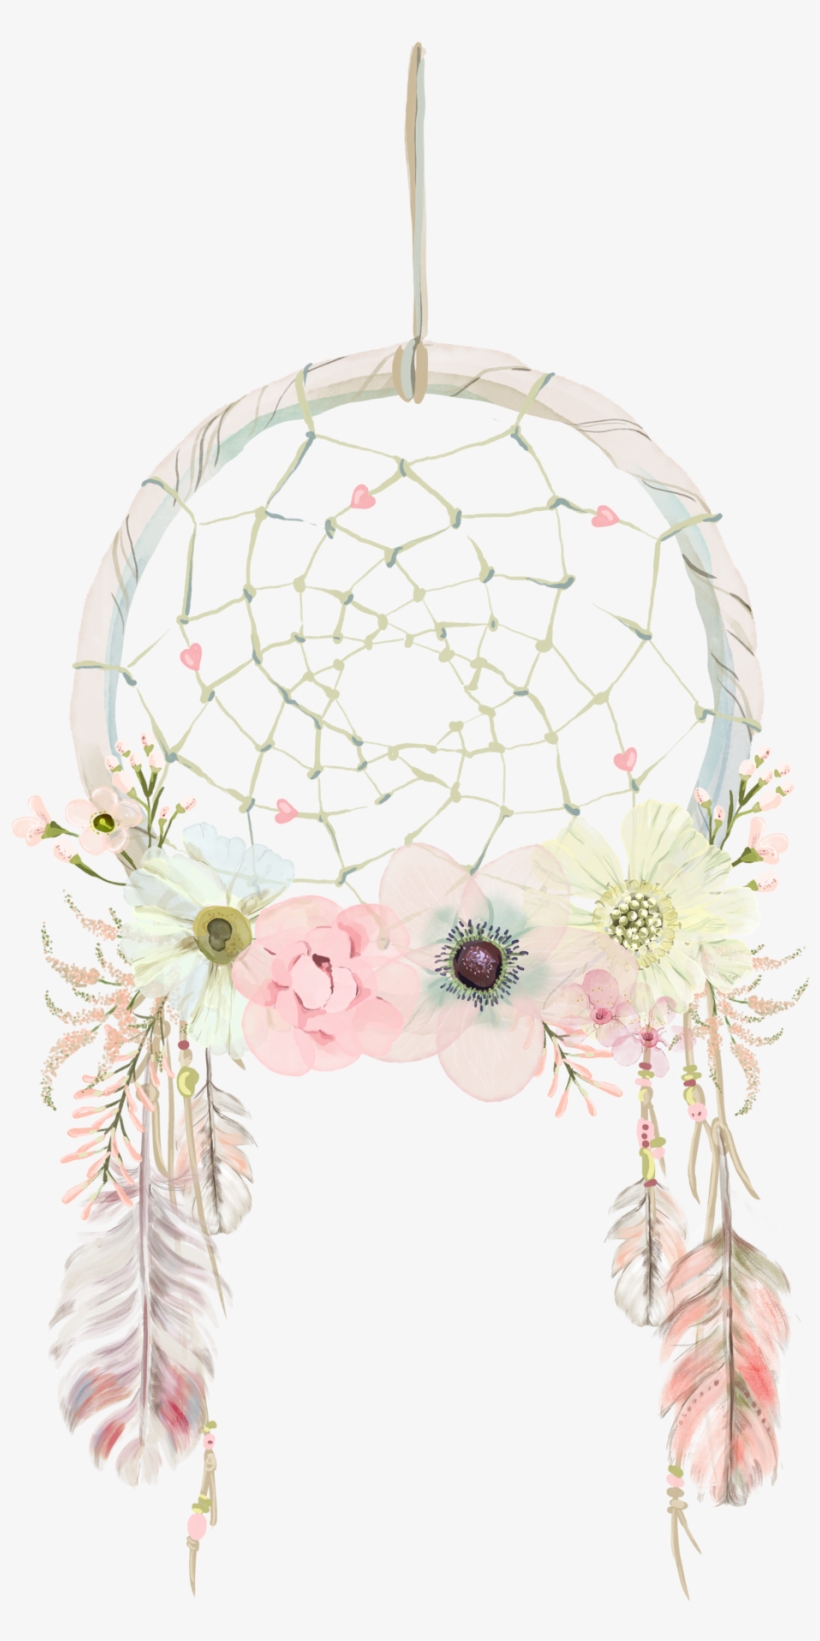 Saferbrowser Yahoo Image Search - Floral Dream Catcher Clipart, transparent png #372013